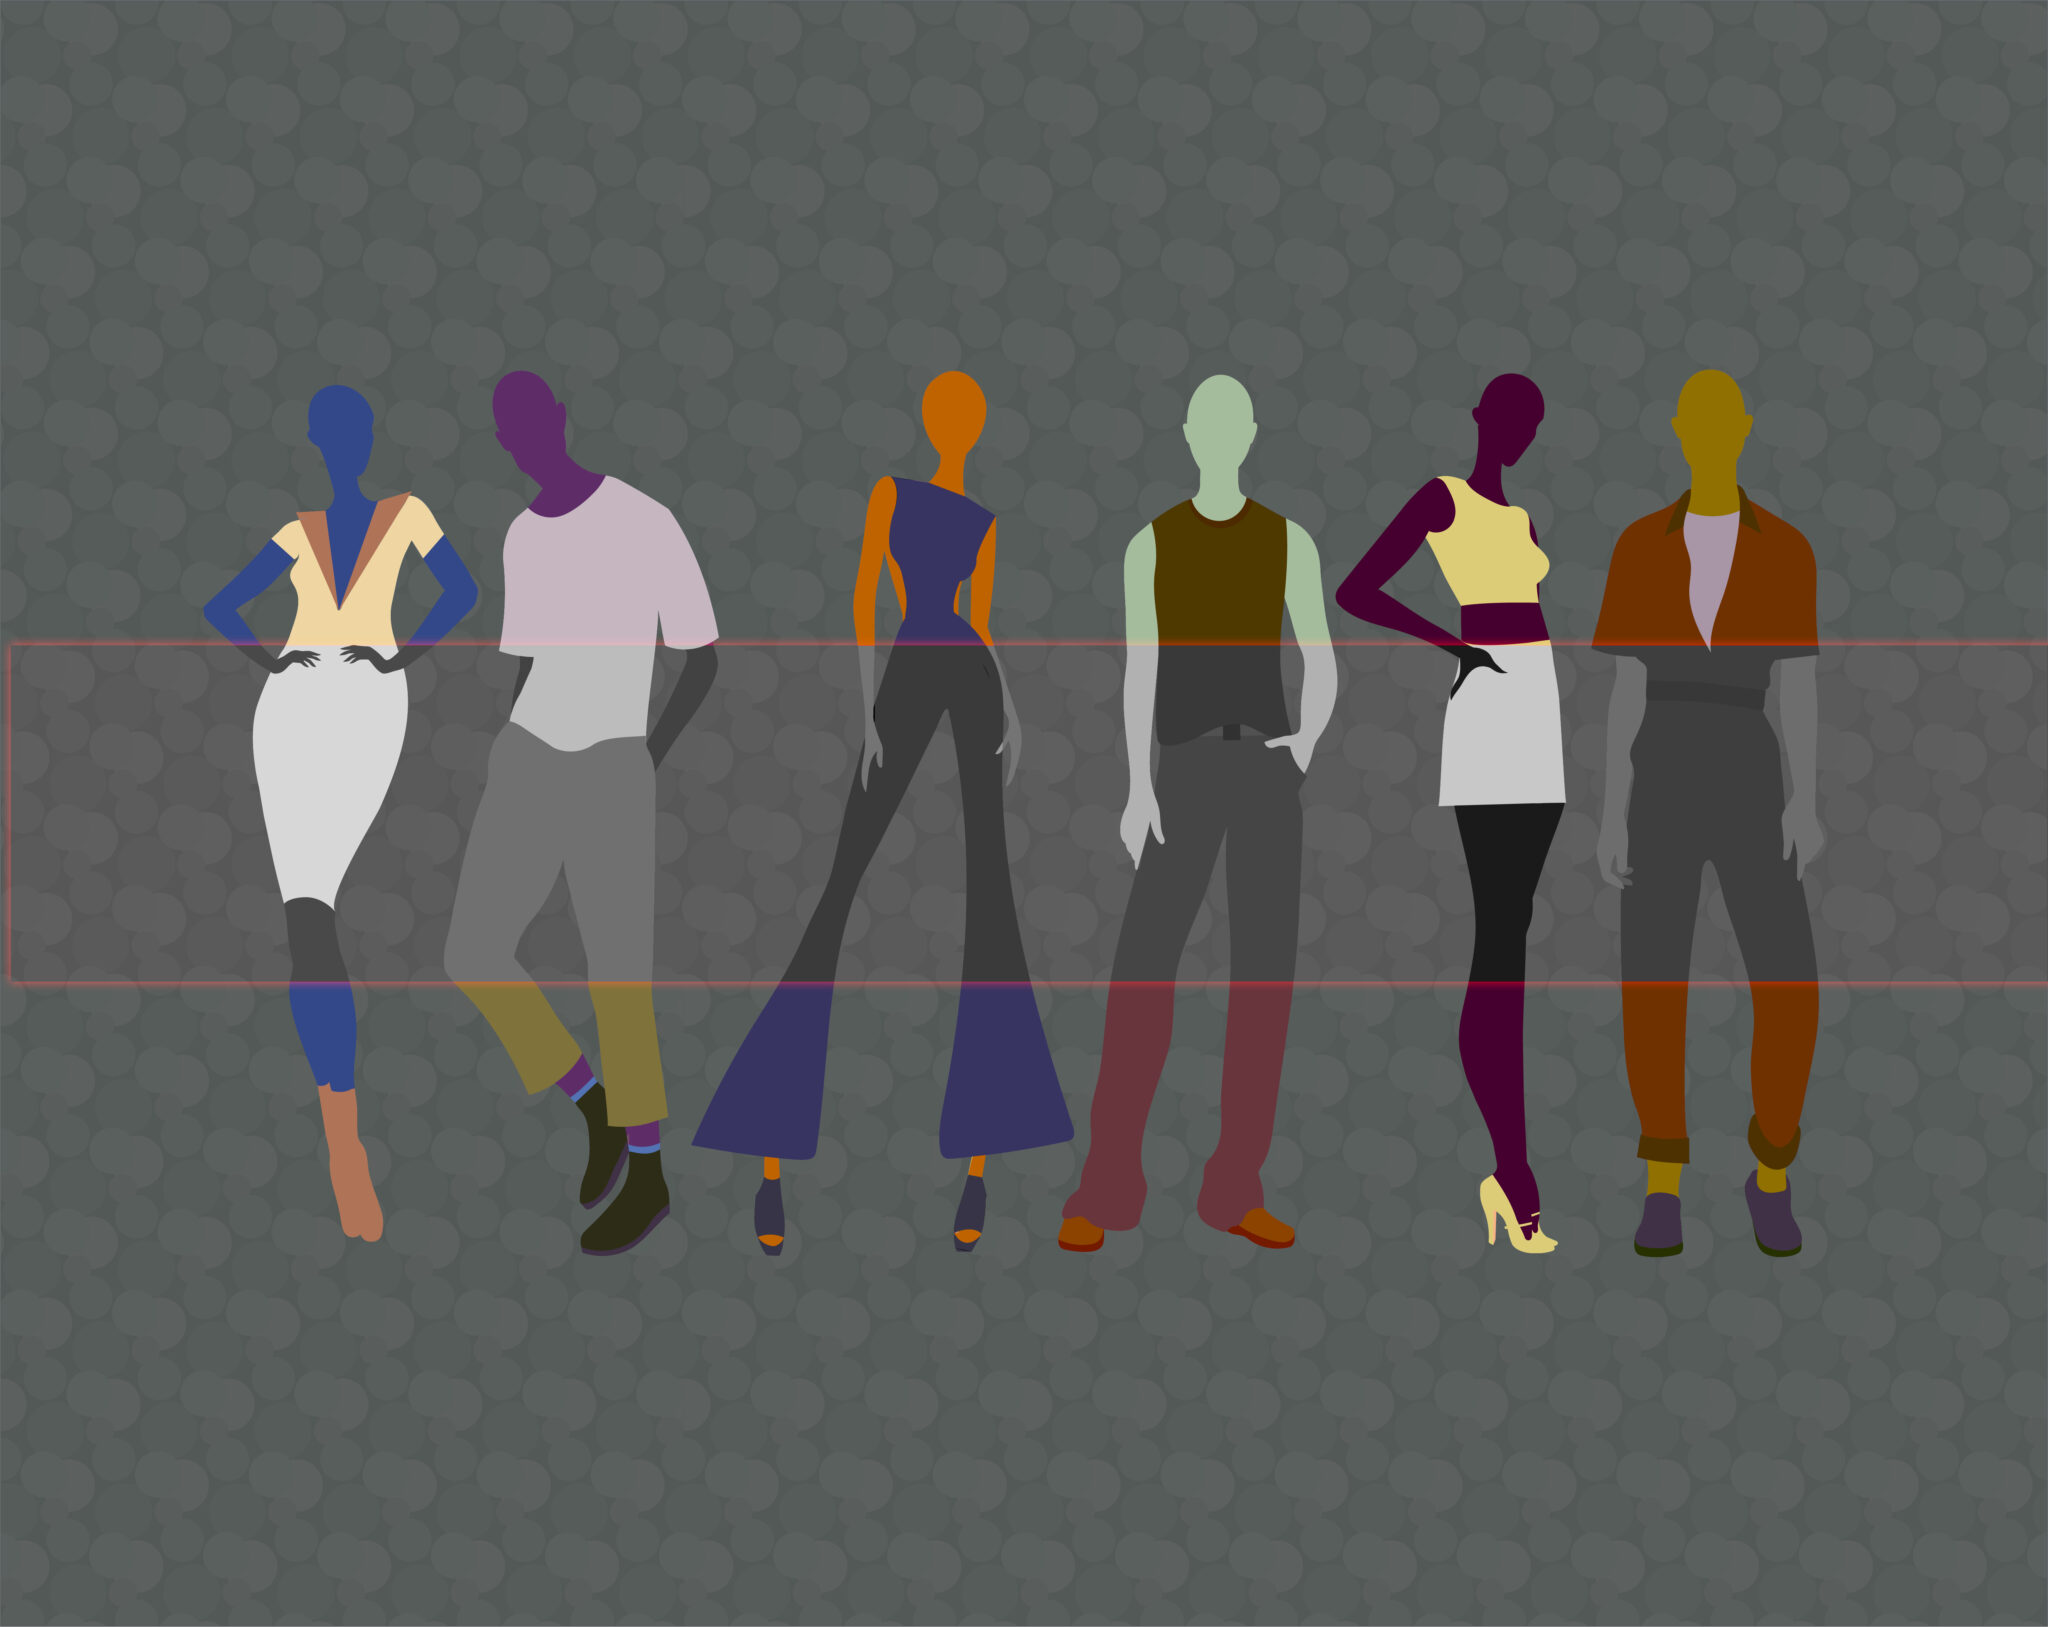 Illustration of five models wearing various shades of colour. A grayscale panel runs through the centre of the image.